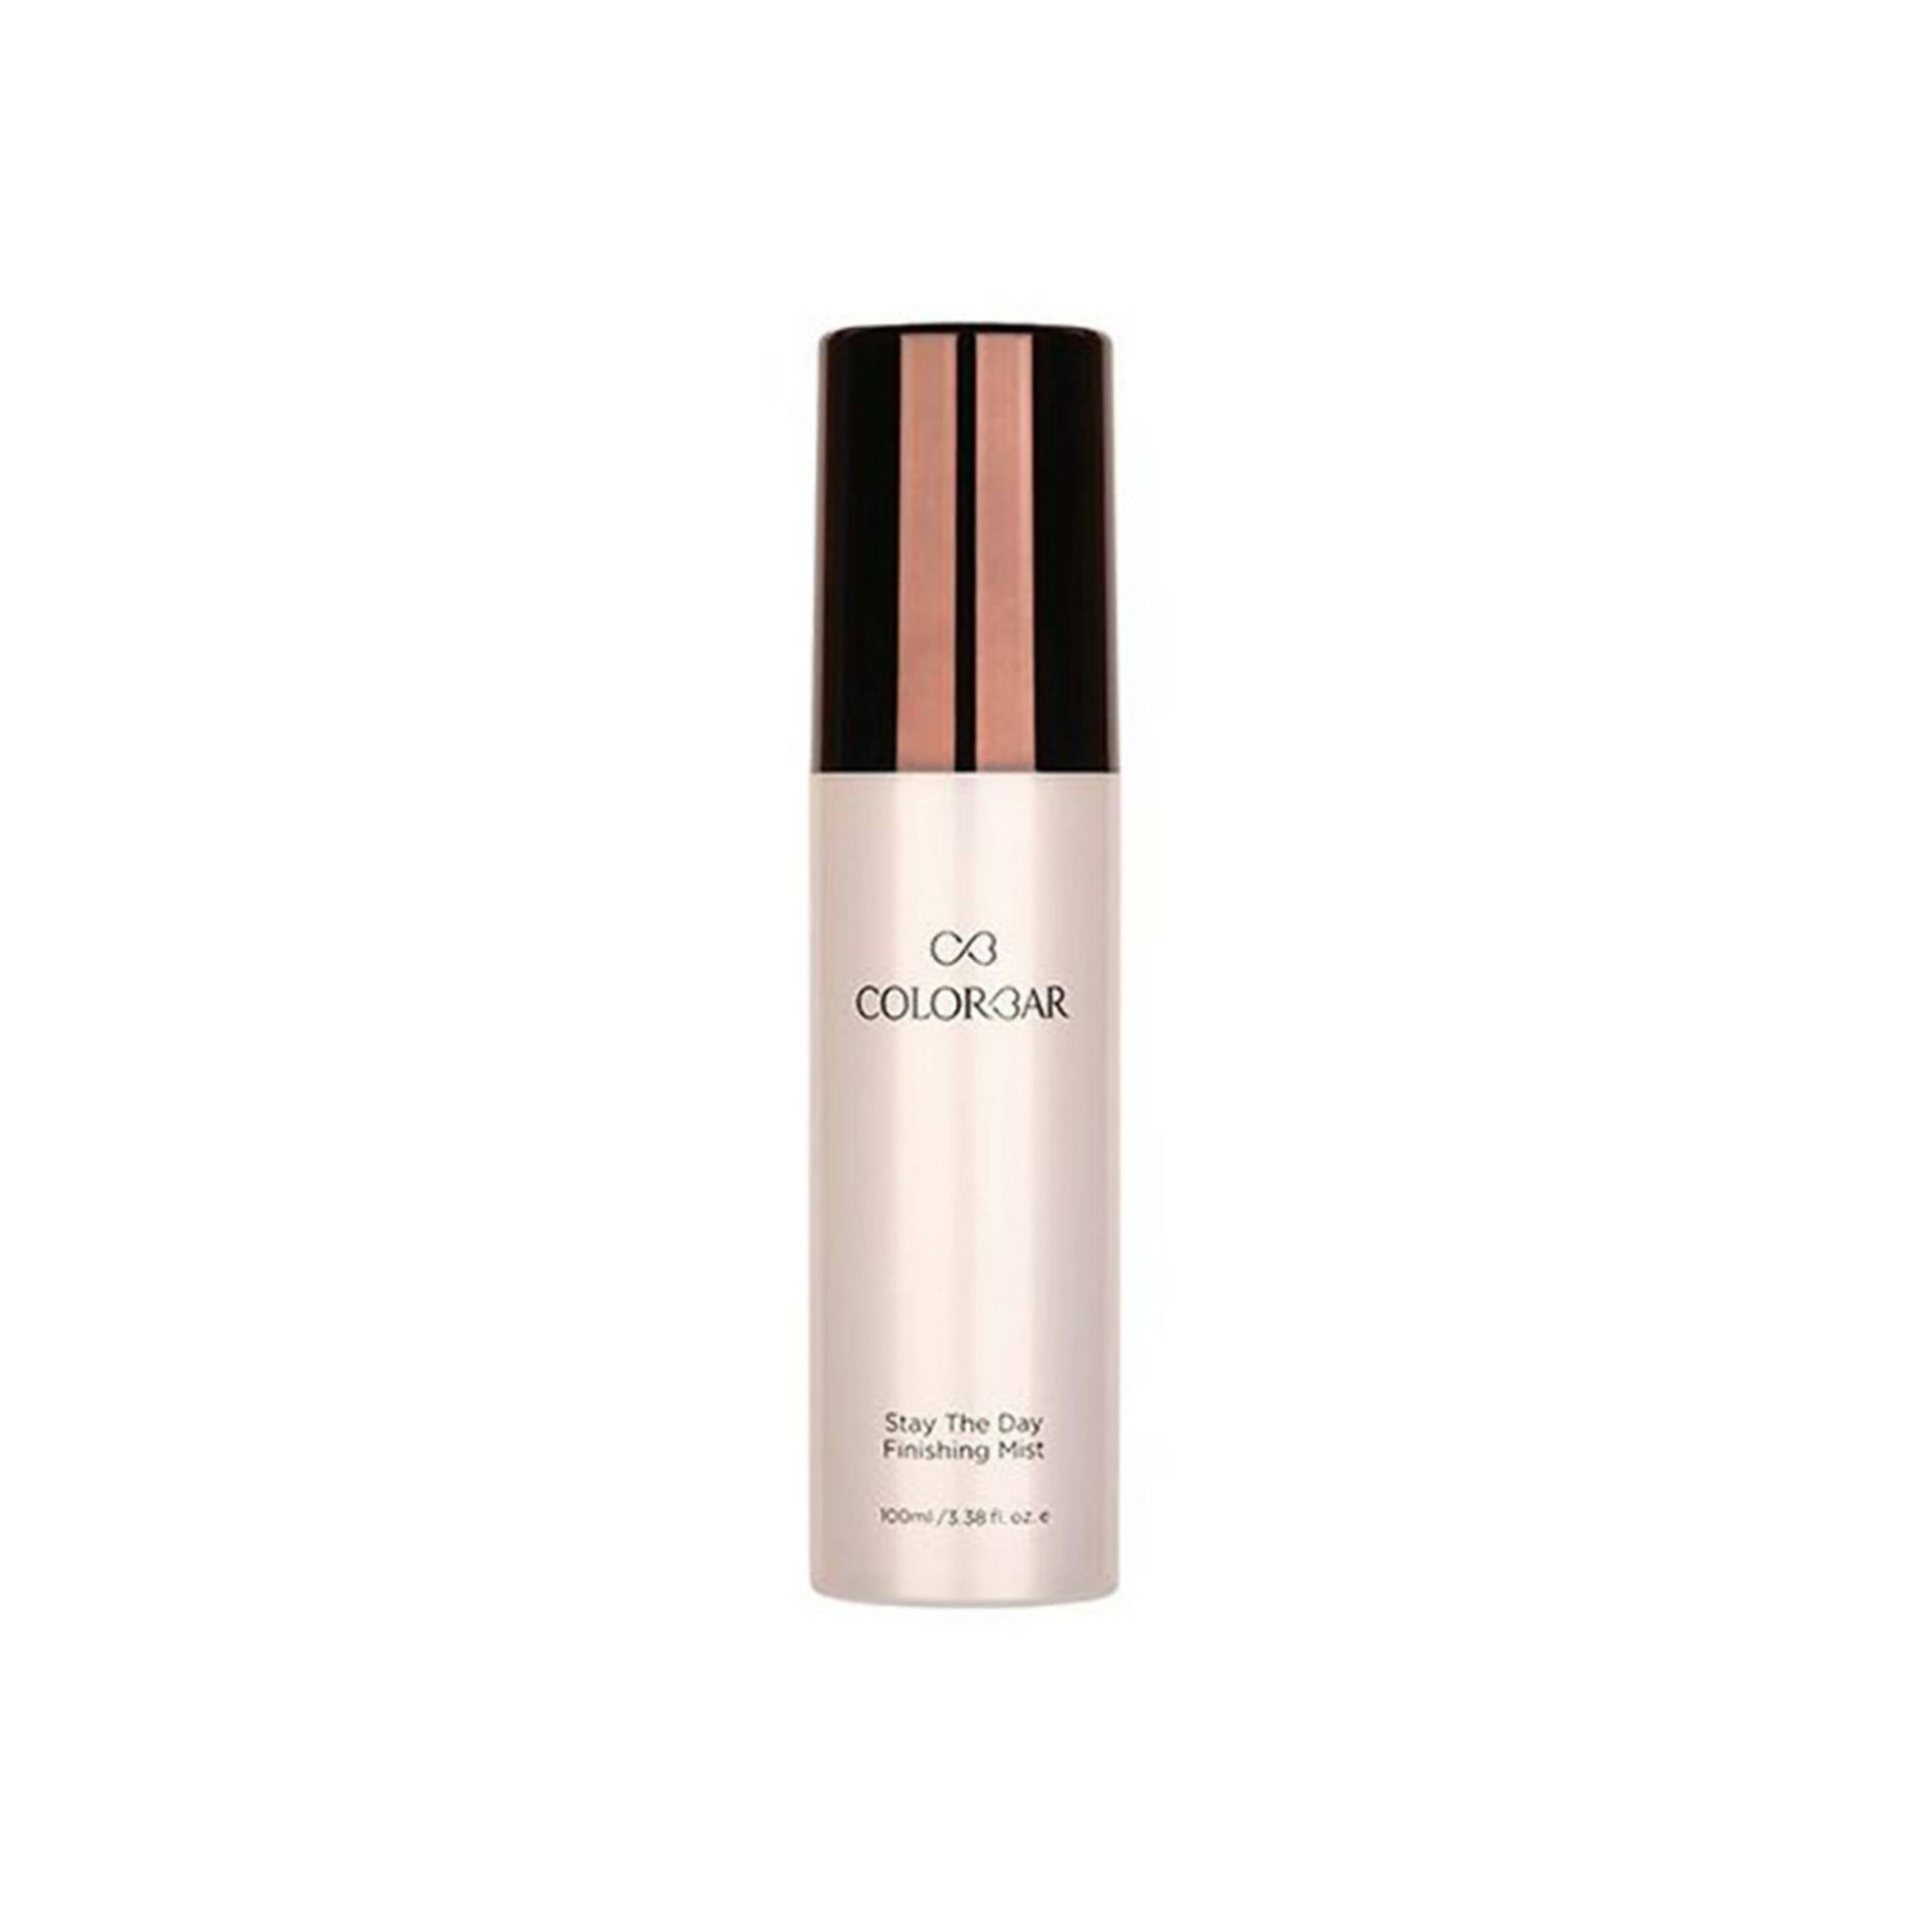 Colorbar Pro Range Stay The Day Finishing Mist - buy in USA, Australia, Canada